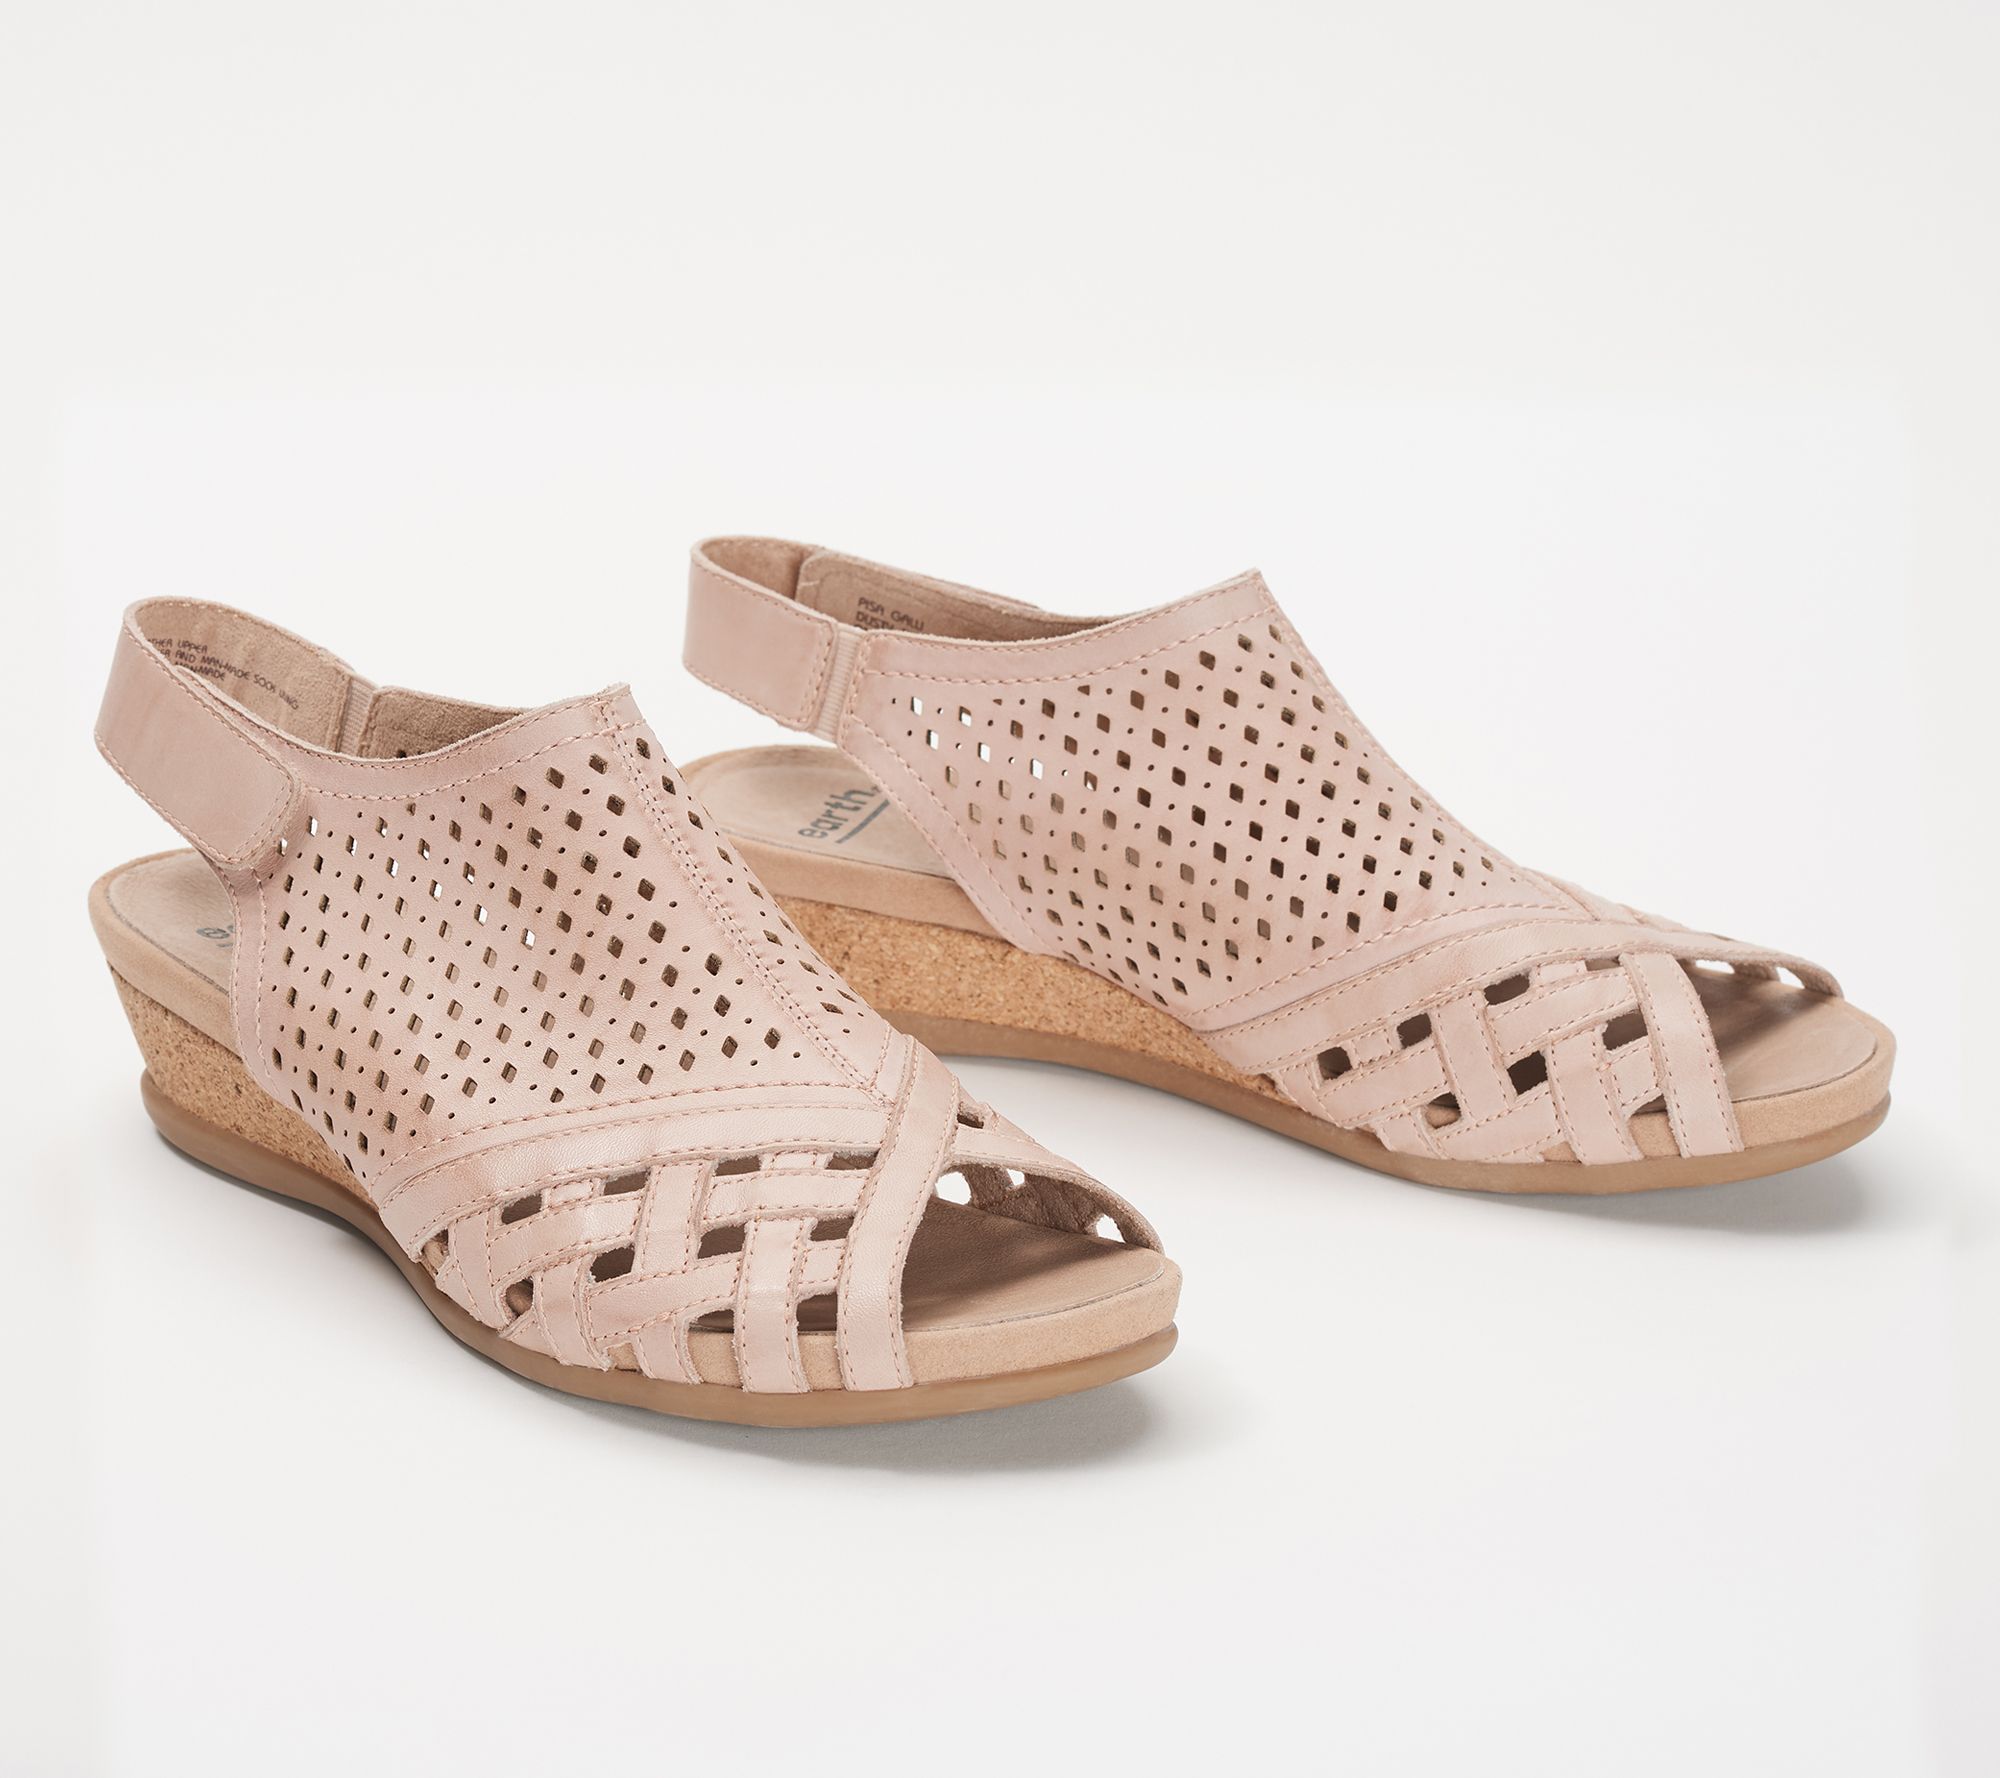 Earth Leather Perforated Wedge Sandals 